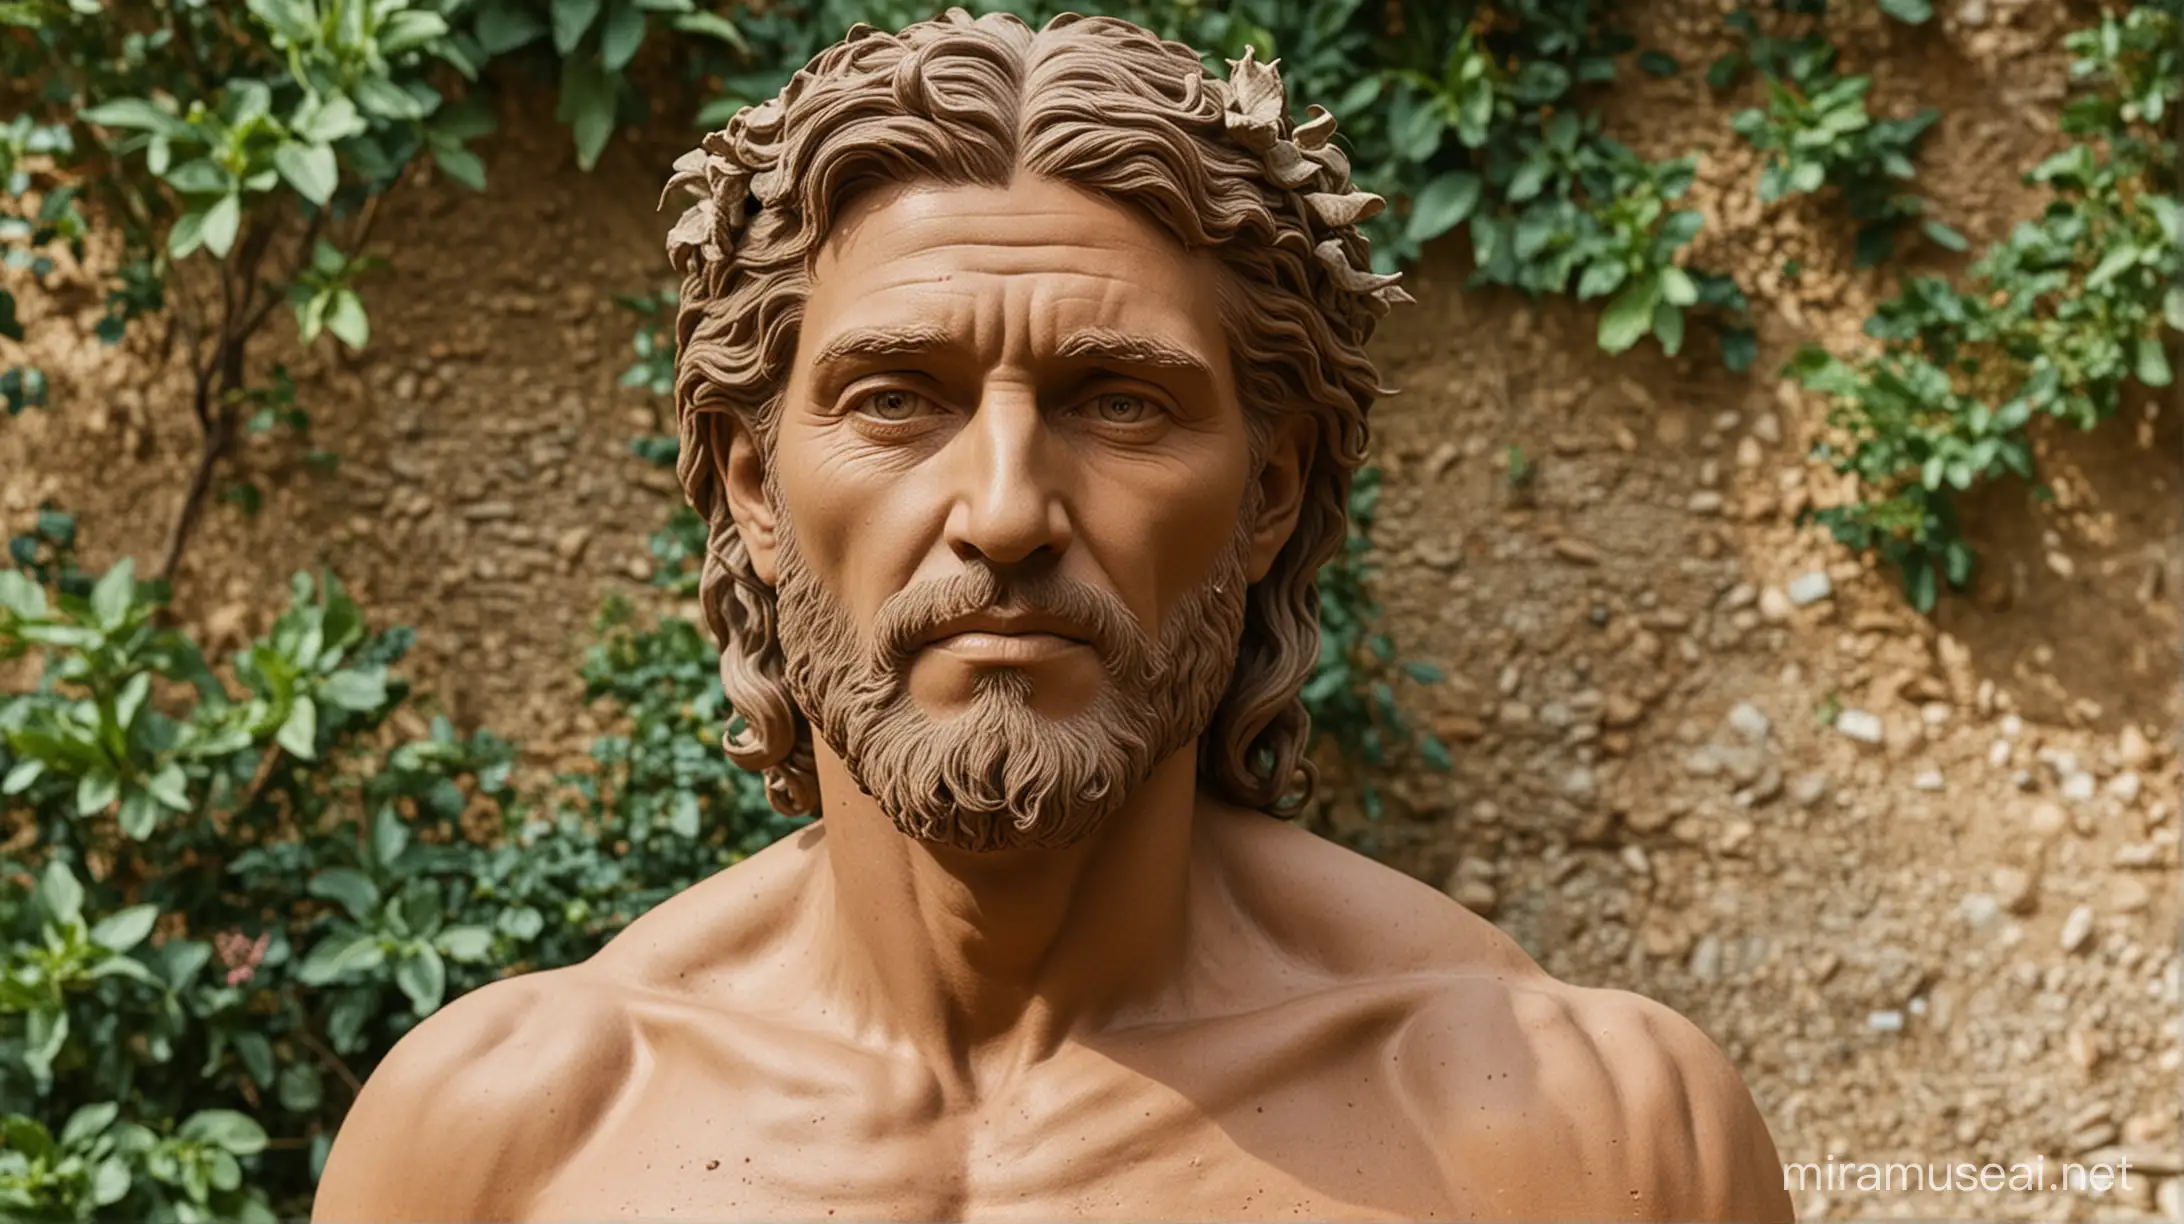 A man that looks like he was made out of clay,   in the garden of eden, in the biblcal era.